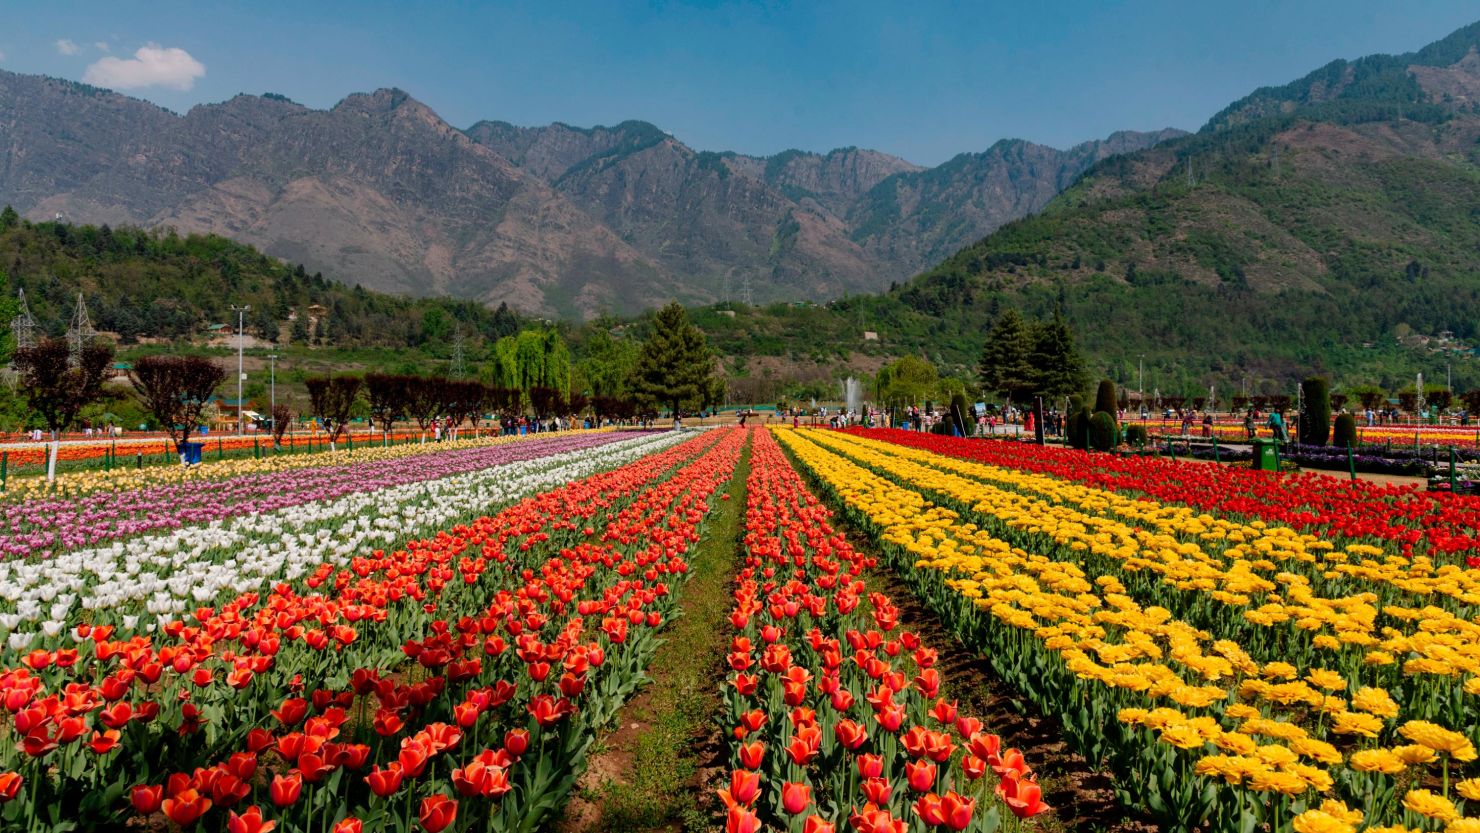 The Indira Gandhi Memorial Tulip Garden, formerly Siraj Bagh, contains approximately 1.5 million tulips in over 60 varieties.